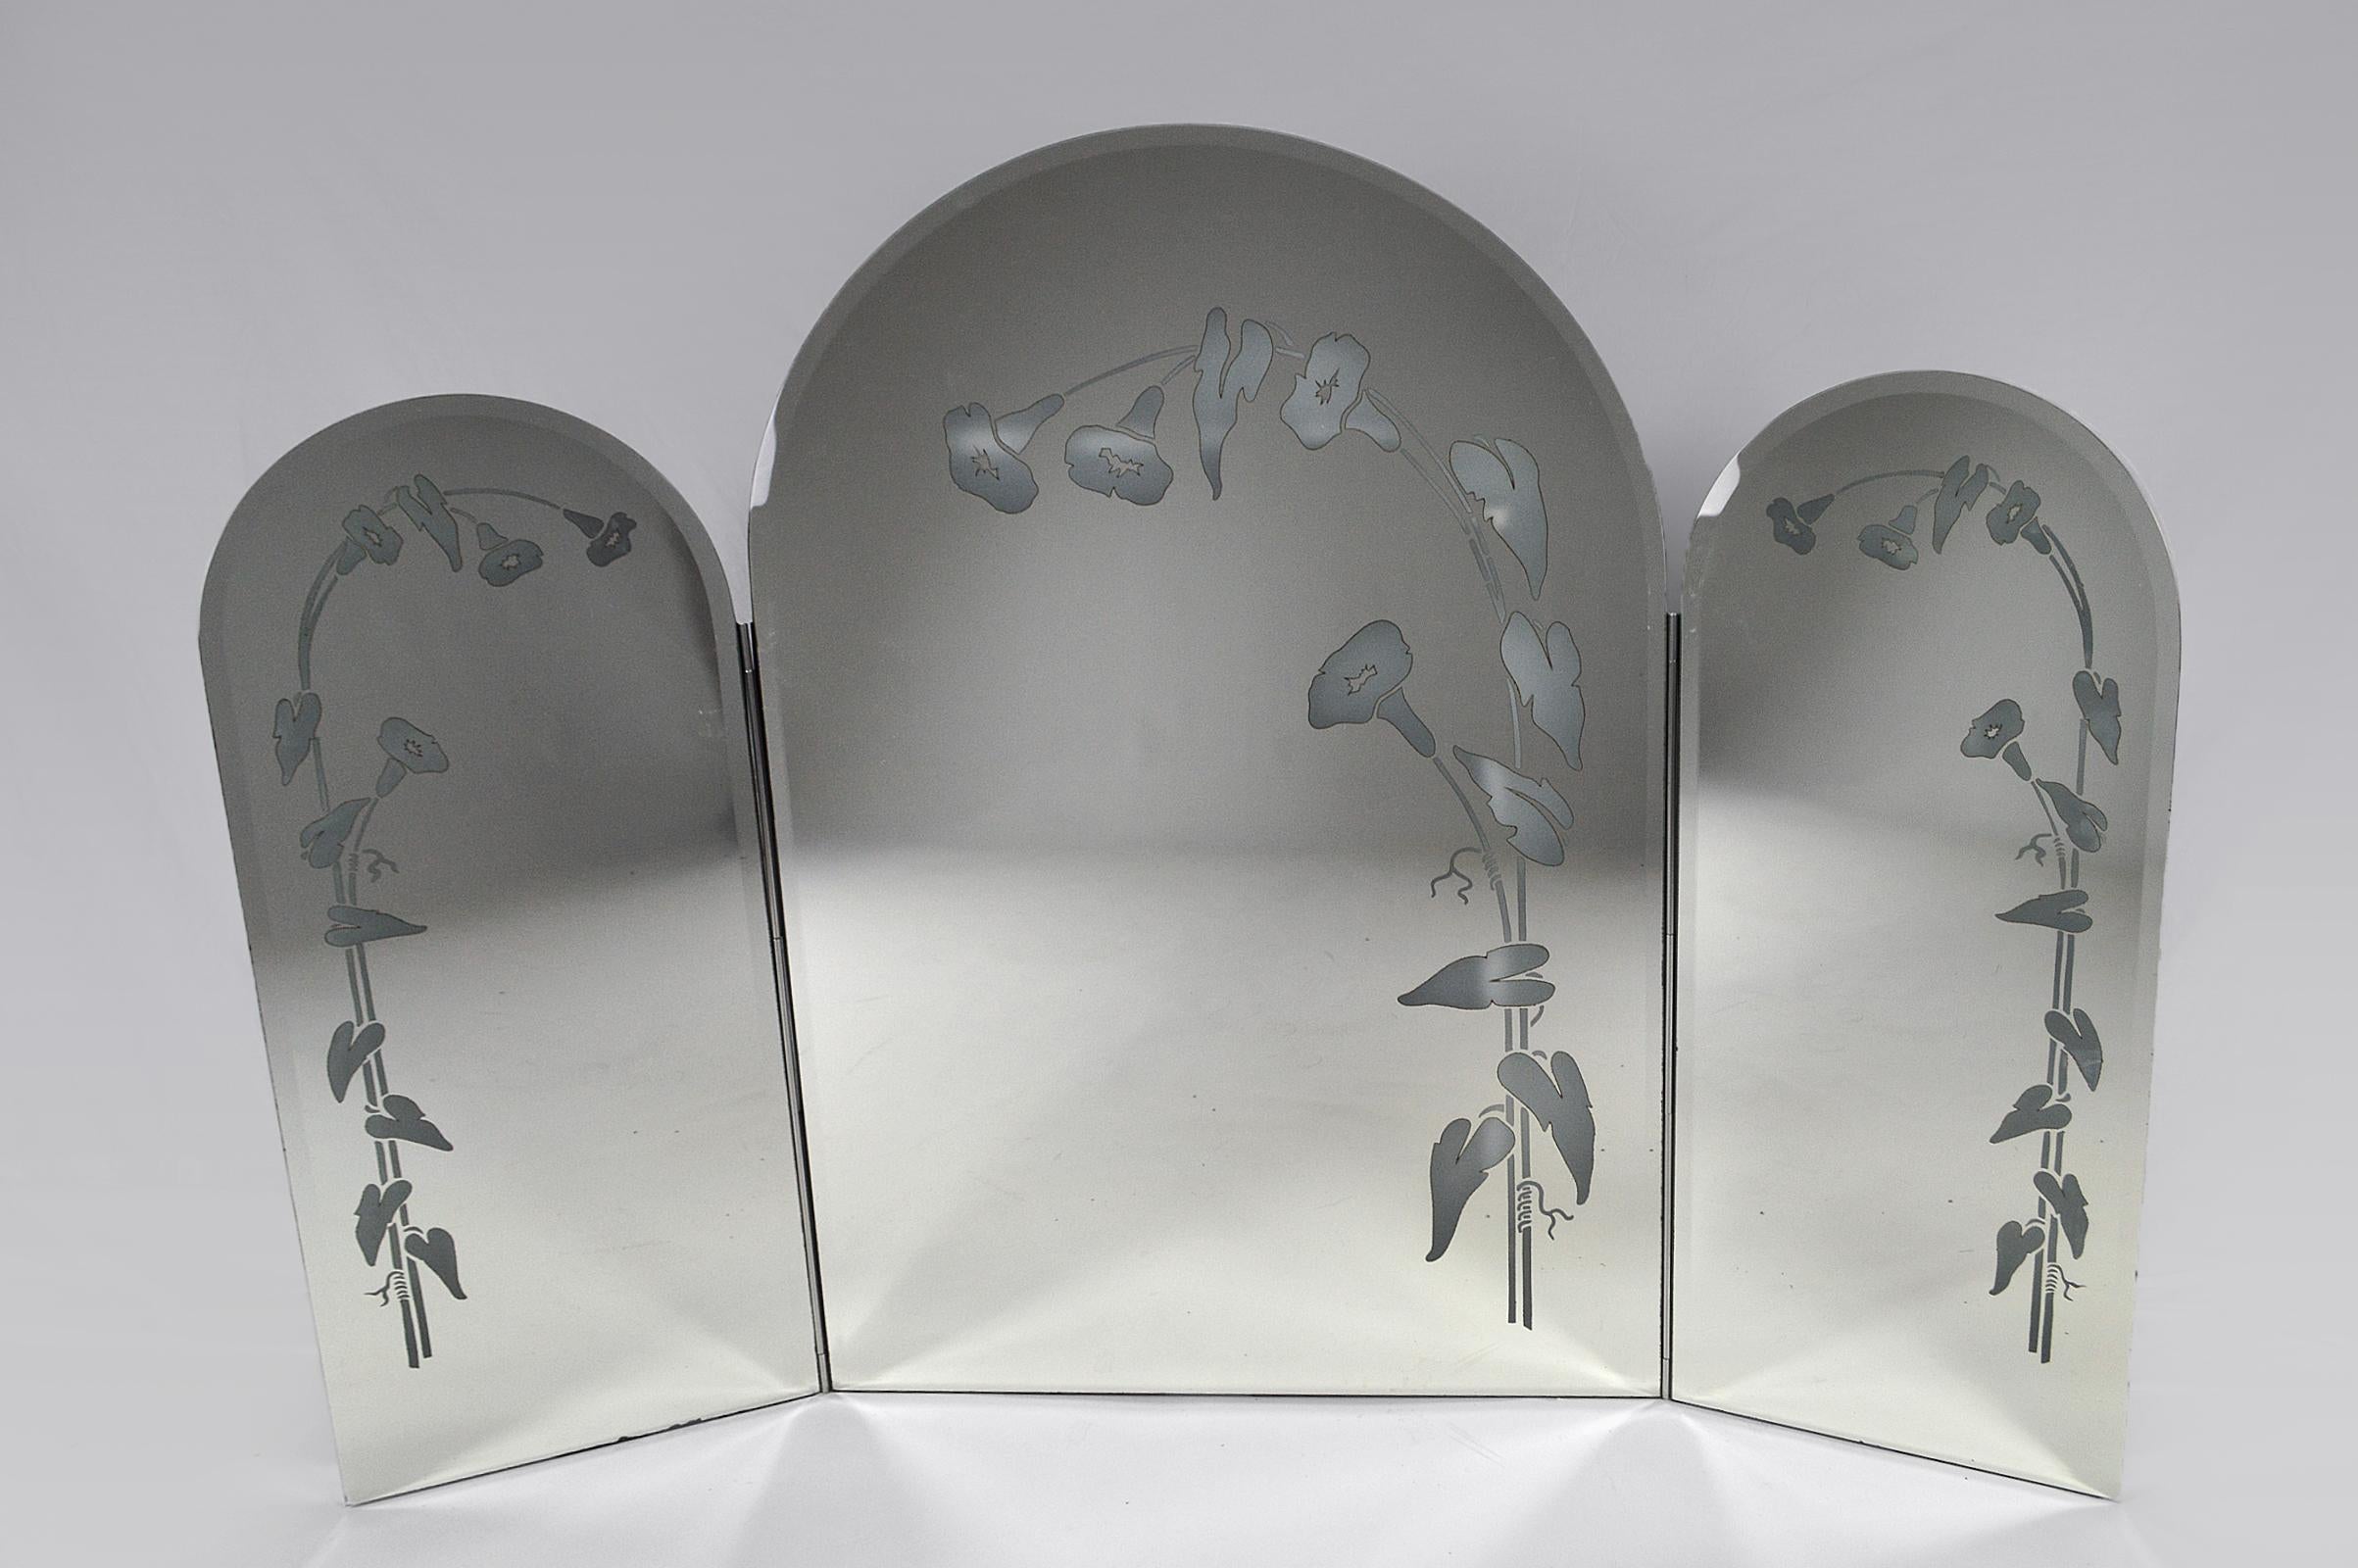 Large triptych mirror with beveled glass and decorated with illuminated floral motifs.
Chromed metal body.

Art Deco and Art Nouveau inspired, Italy, circa 1970-1980.

In excellent condition, electricity checked.

Dimensions:
Height 102 cm
Width 144